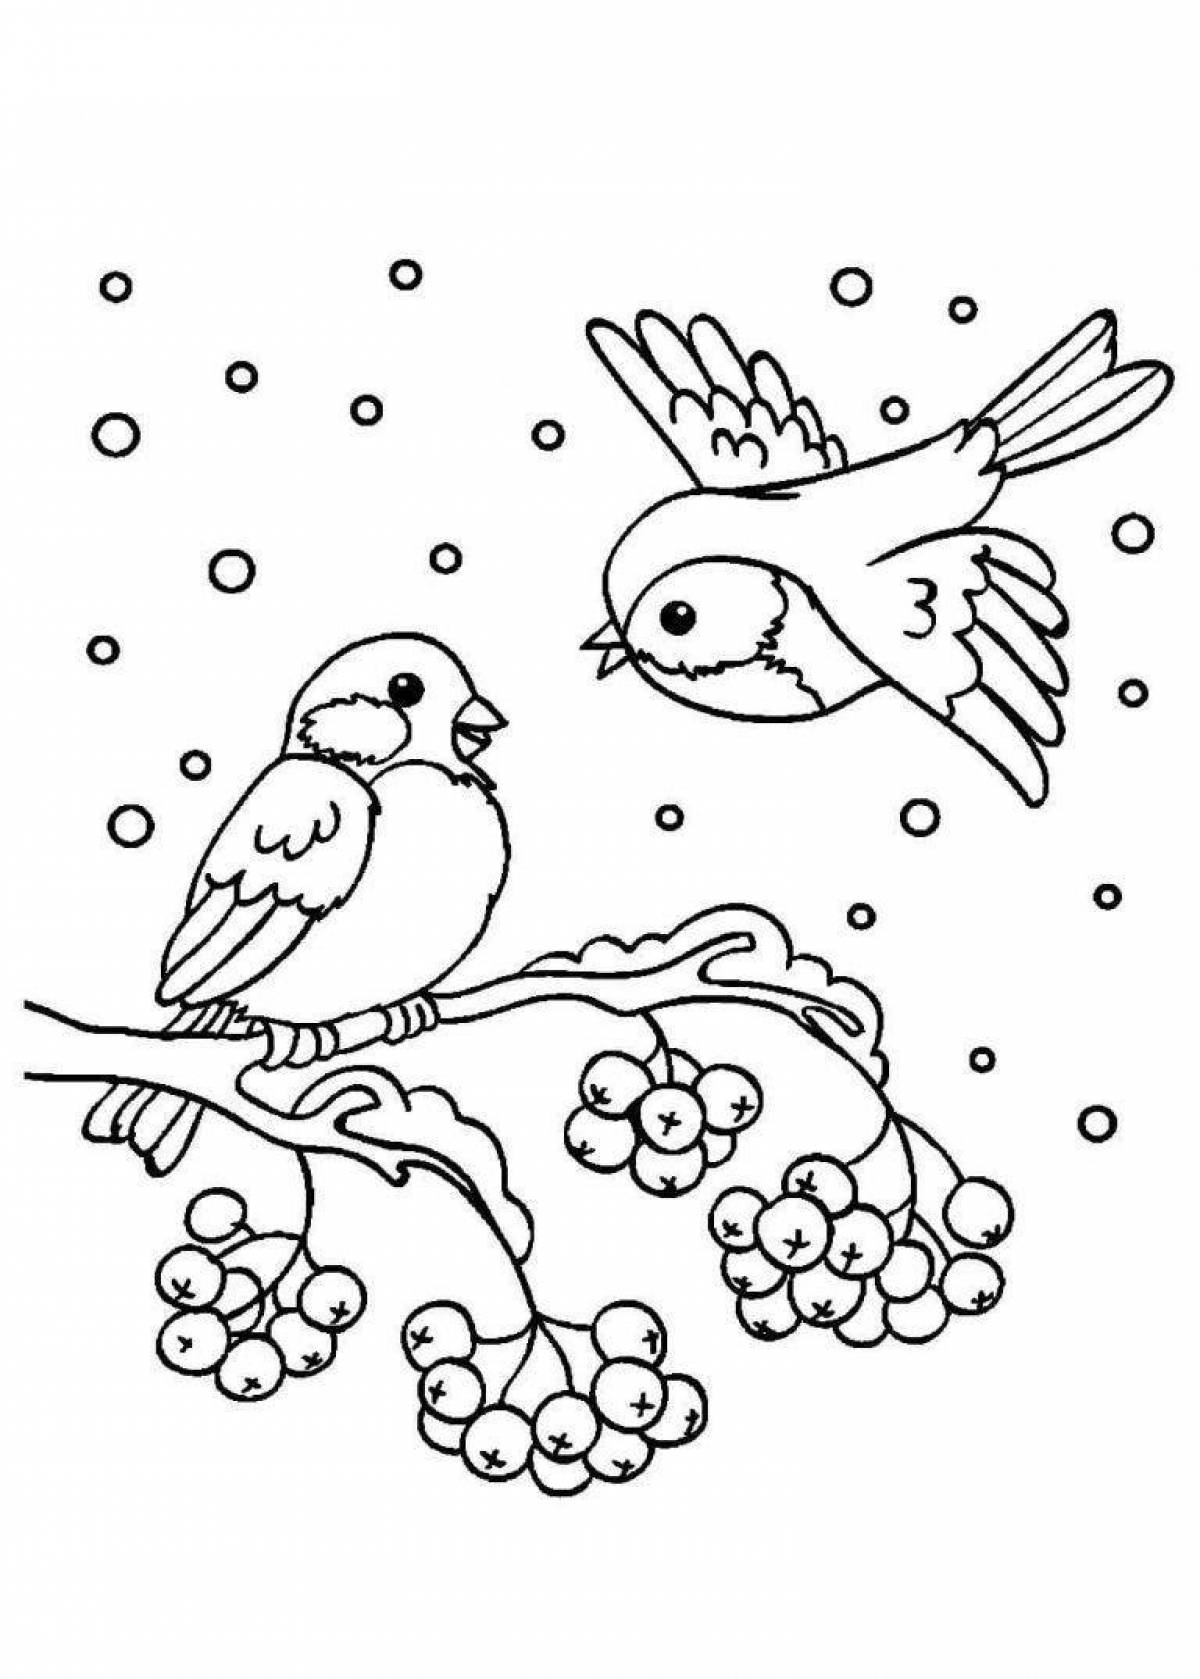 Fabulous migratory birds coloring pages for children